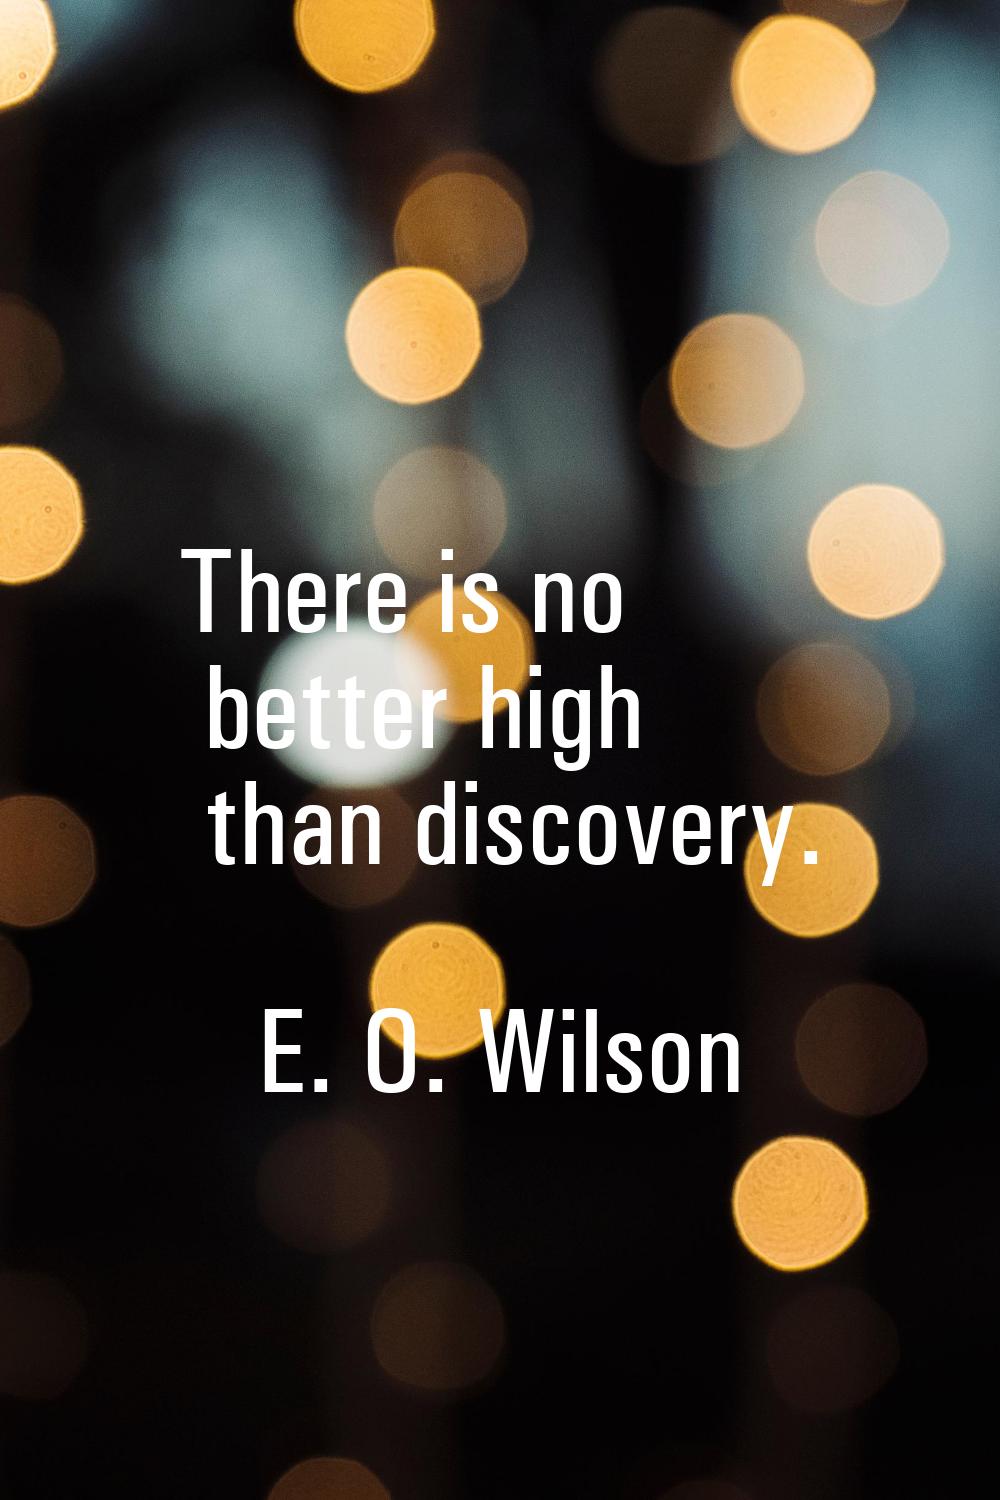 There is no better high than discovery.